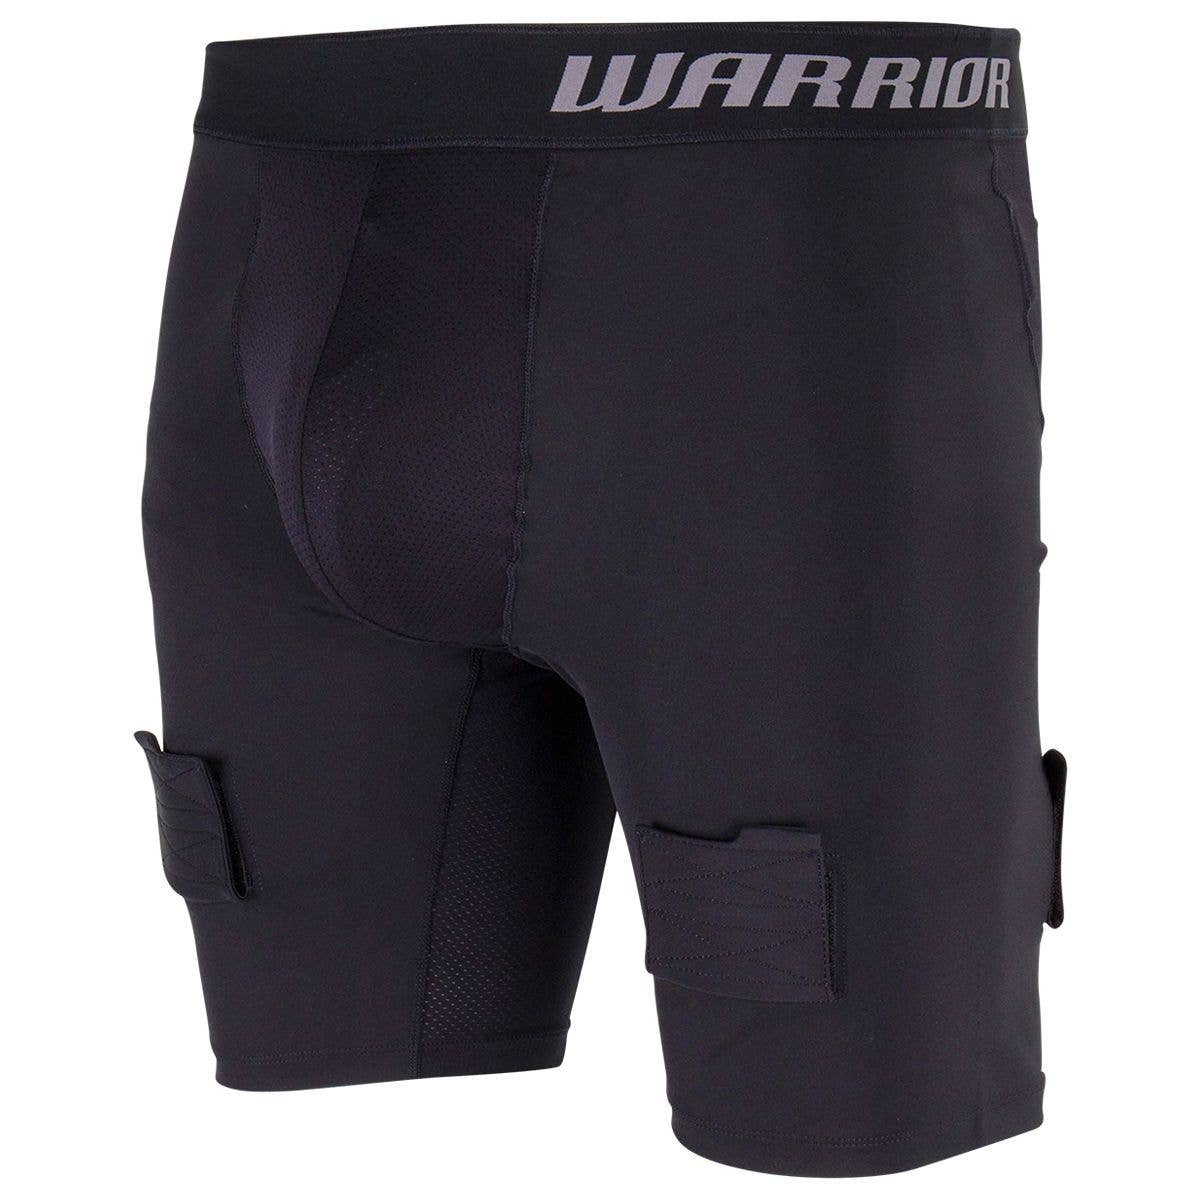 Compression Short with PADS Select 6421 - Compression garments